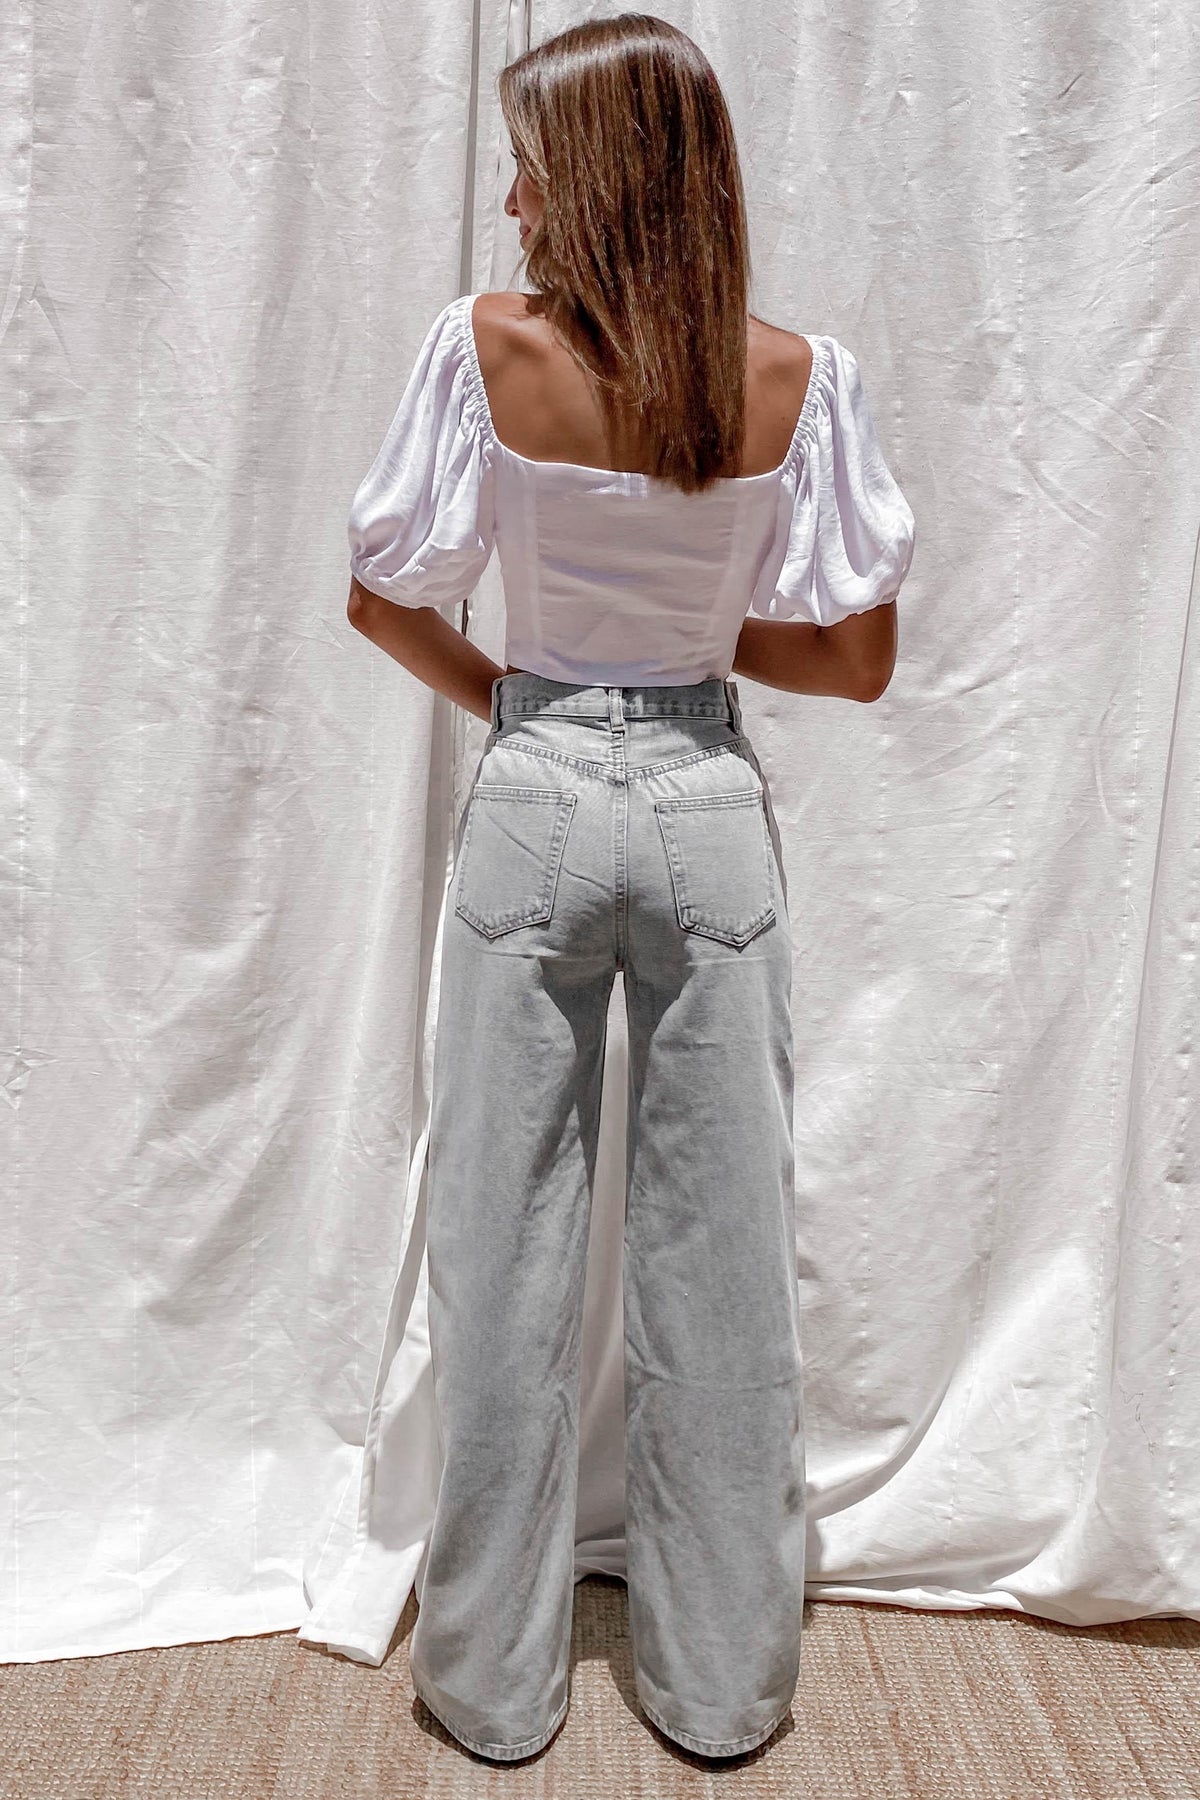 Shut You Down Top, CROP TOP, CROP TOPS, OFF SHOULDER, Sale, TOPS, WHITE, Our New Shut You Down Top Is Now Only $45.05 Exclusive At Mishkah, Our New Shut You Down Top is now only $45.05-We Have The Latest Women&#39;s Tops @ Mishkah Online Fashion Boutique-MISHKAH